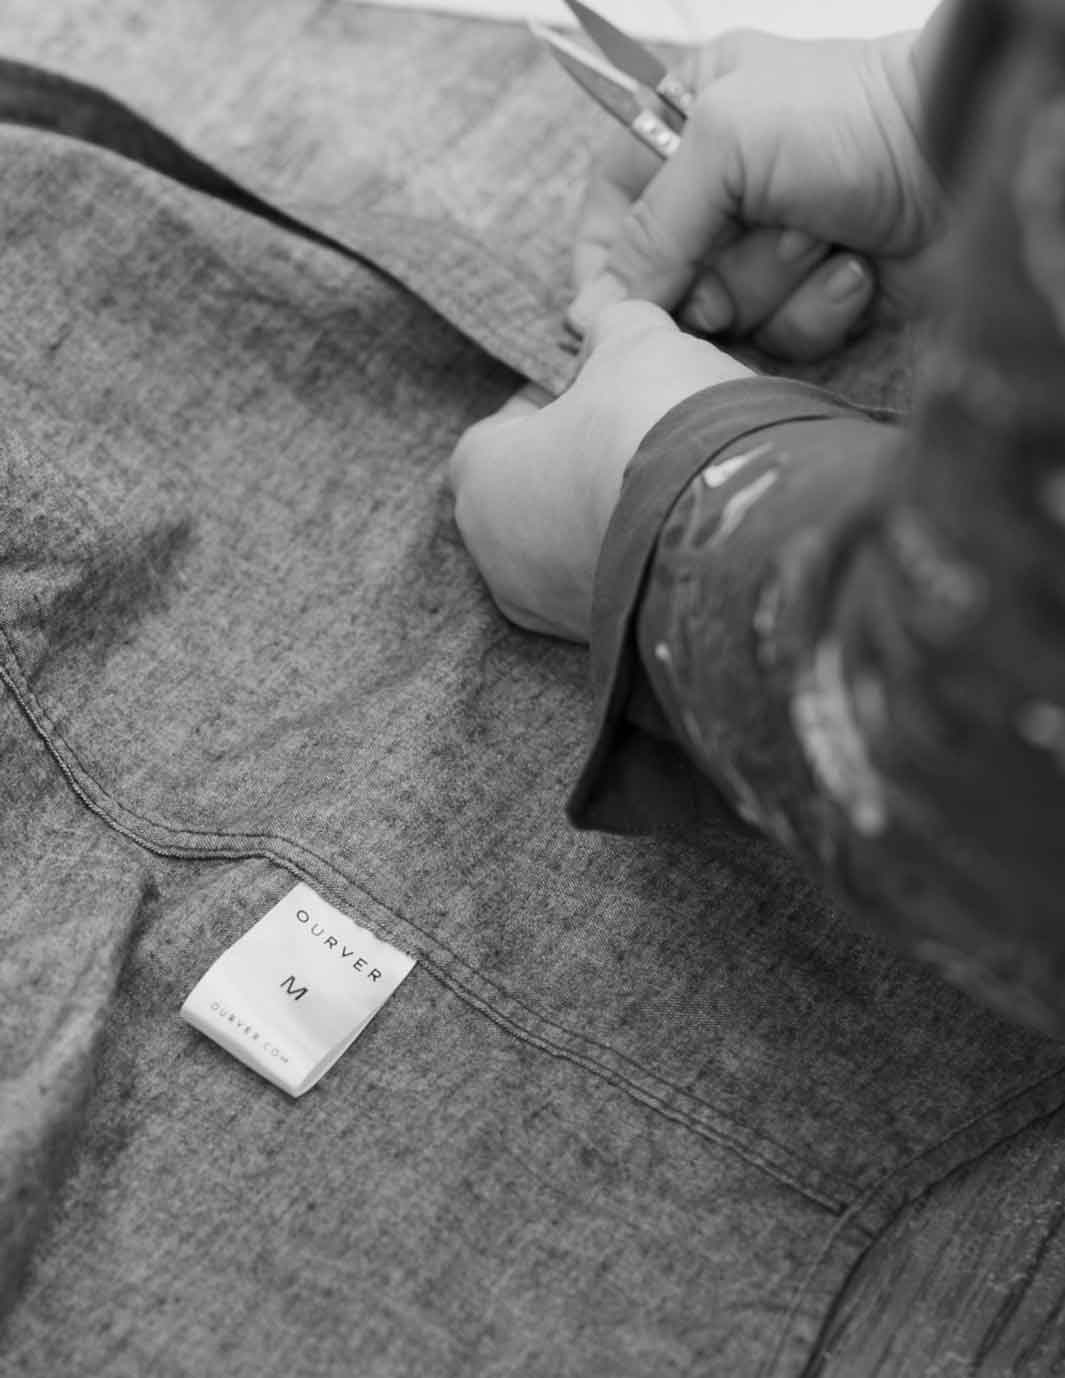 Hands stitching buttons on to ourver shirt